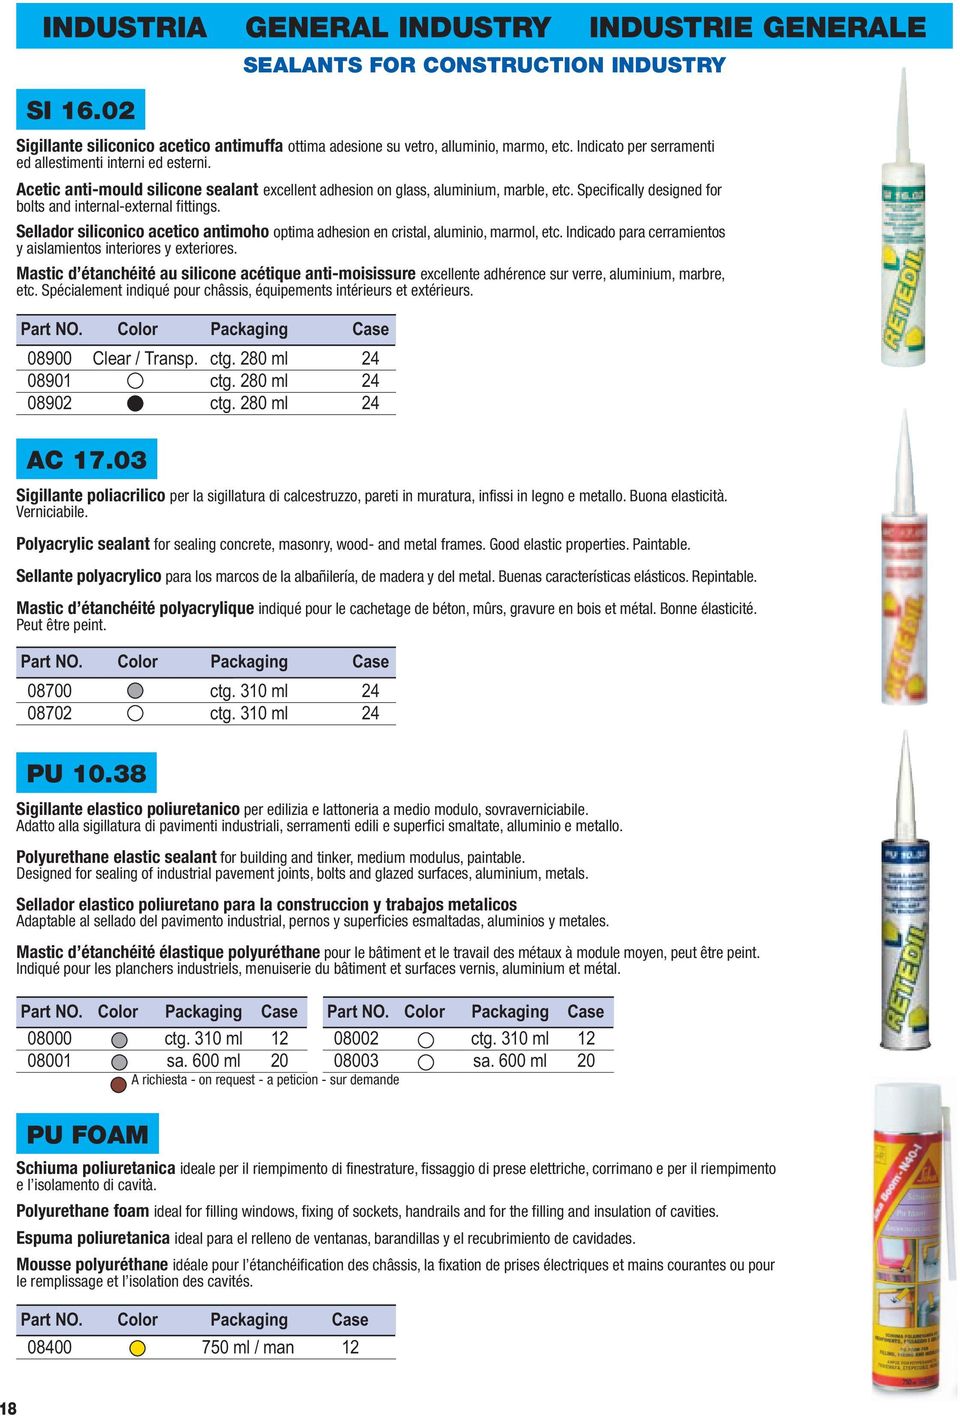 Acetic anti-mould silicone sealant excellent adhesion on glass, aluminium, marble, etc. Specifically designed for bolts and internal-external fittings.